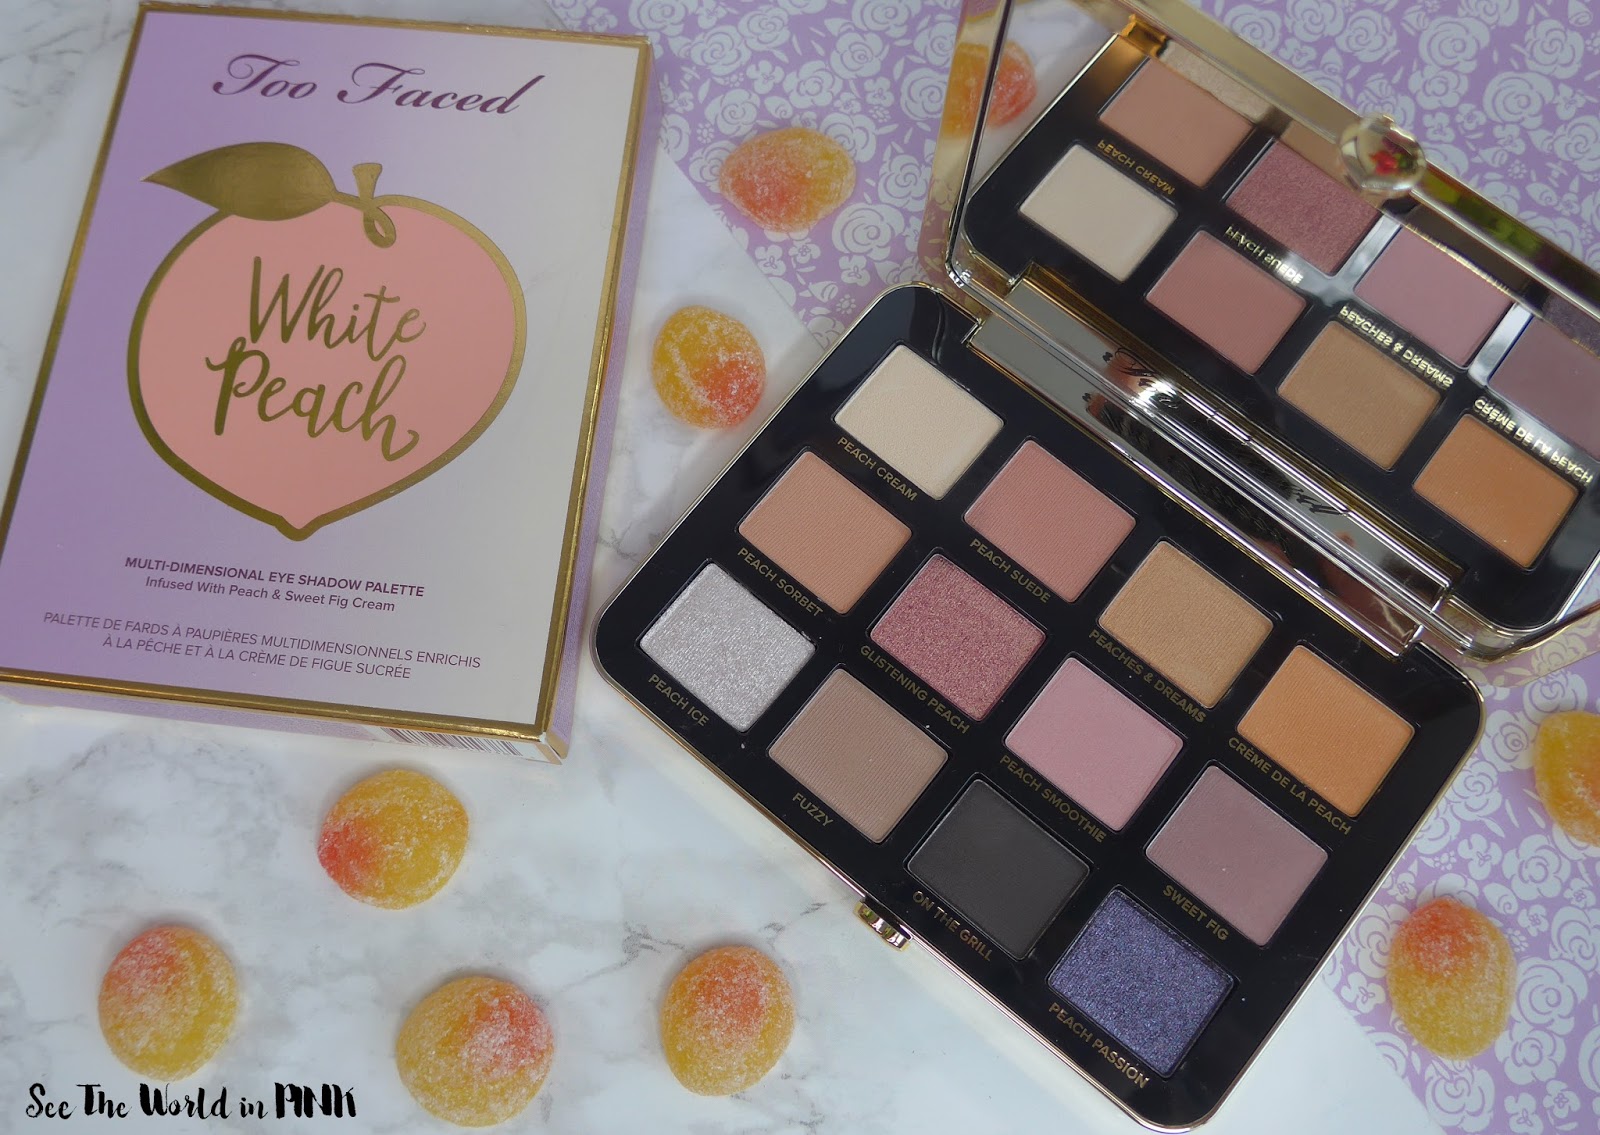 Too Faced White Peach Eye Shadow Palette - Swatches, 3 Looks, and Review!